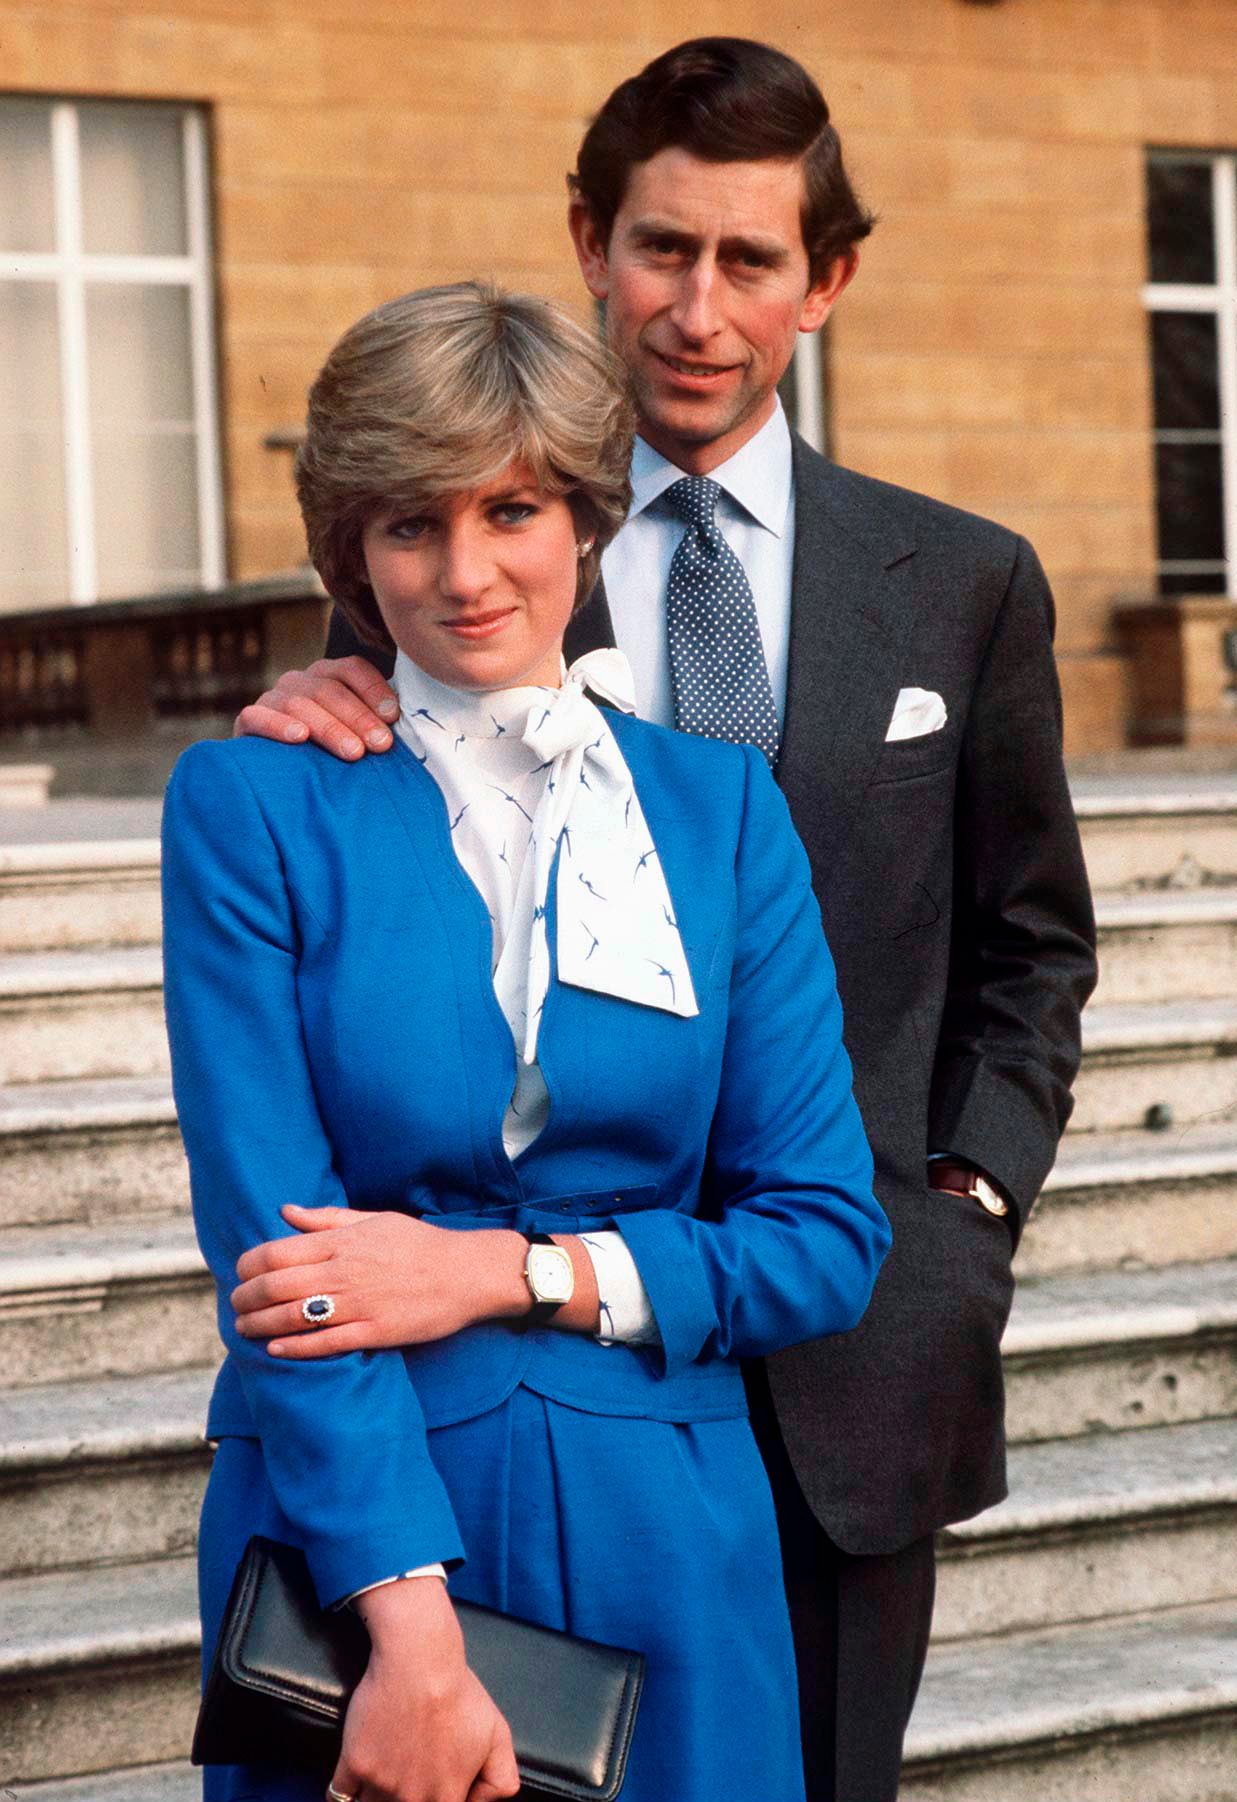 Lady Diana Spencer and Prince Charles' engagement photo